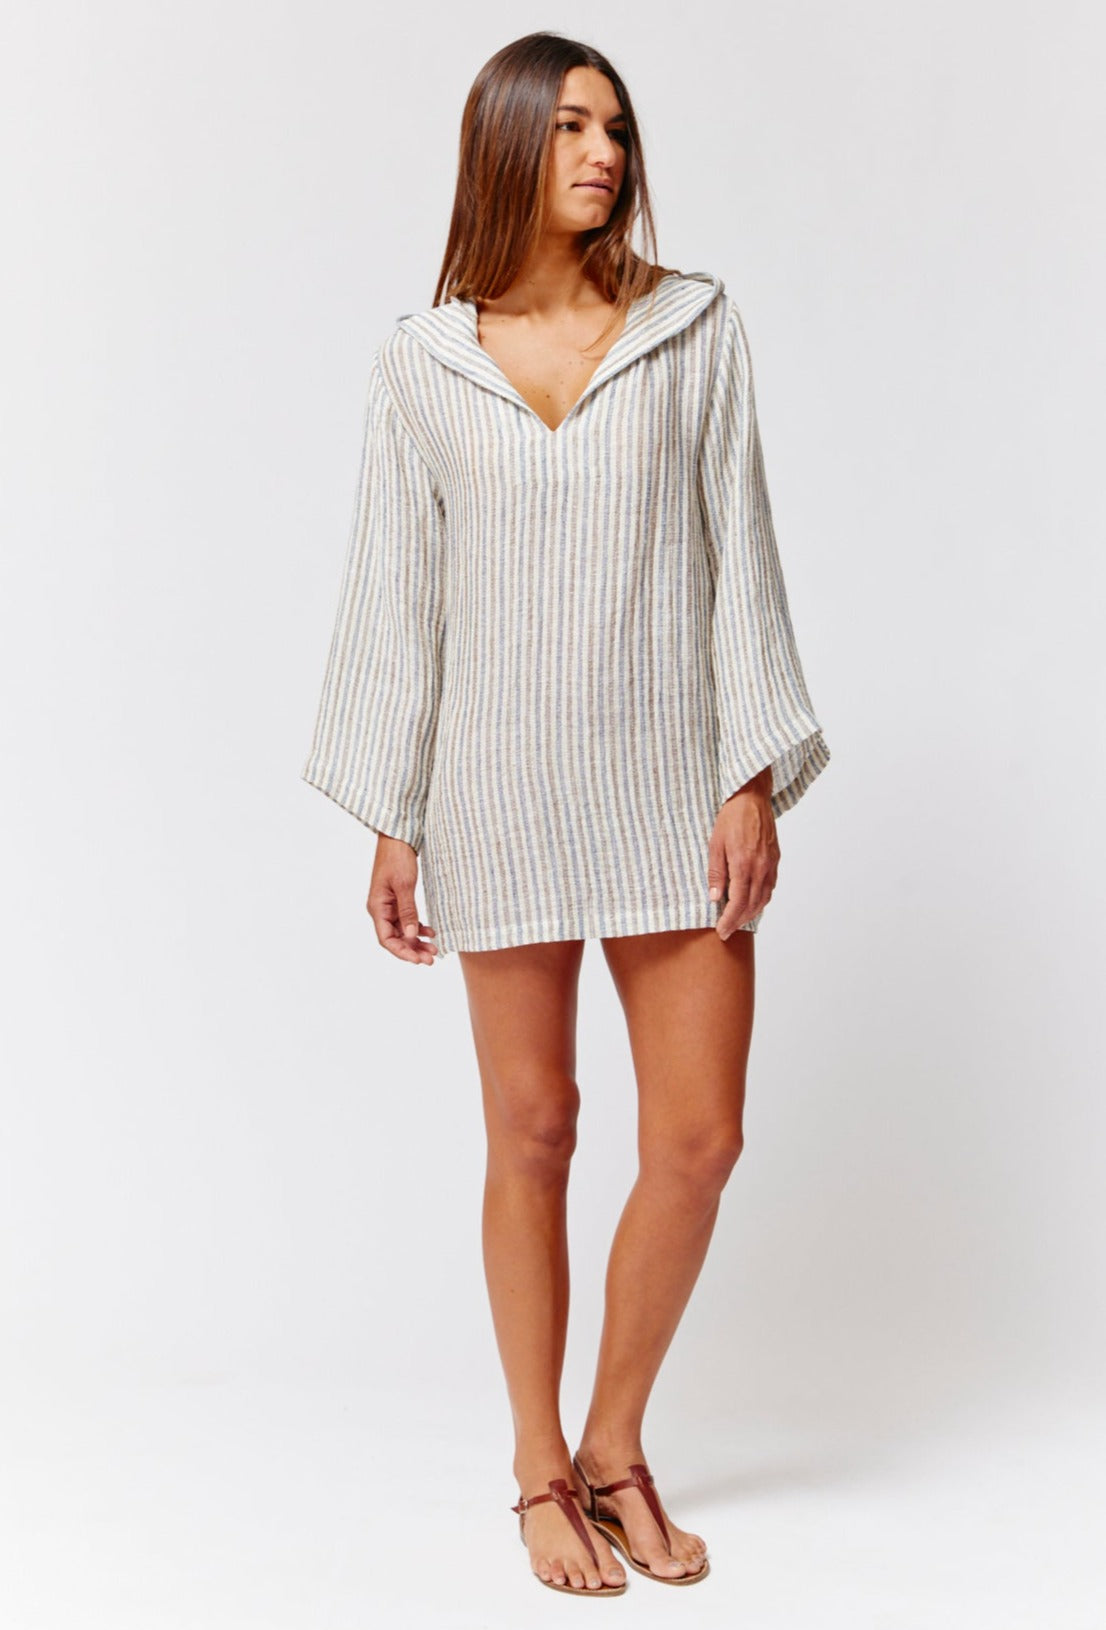 THE BEACH TUNIC in NATURAL/NAVY/BROWN STRIPED CHIOS GAUZE